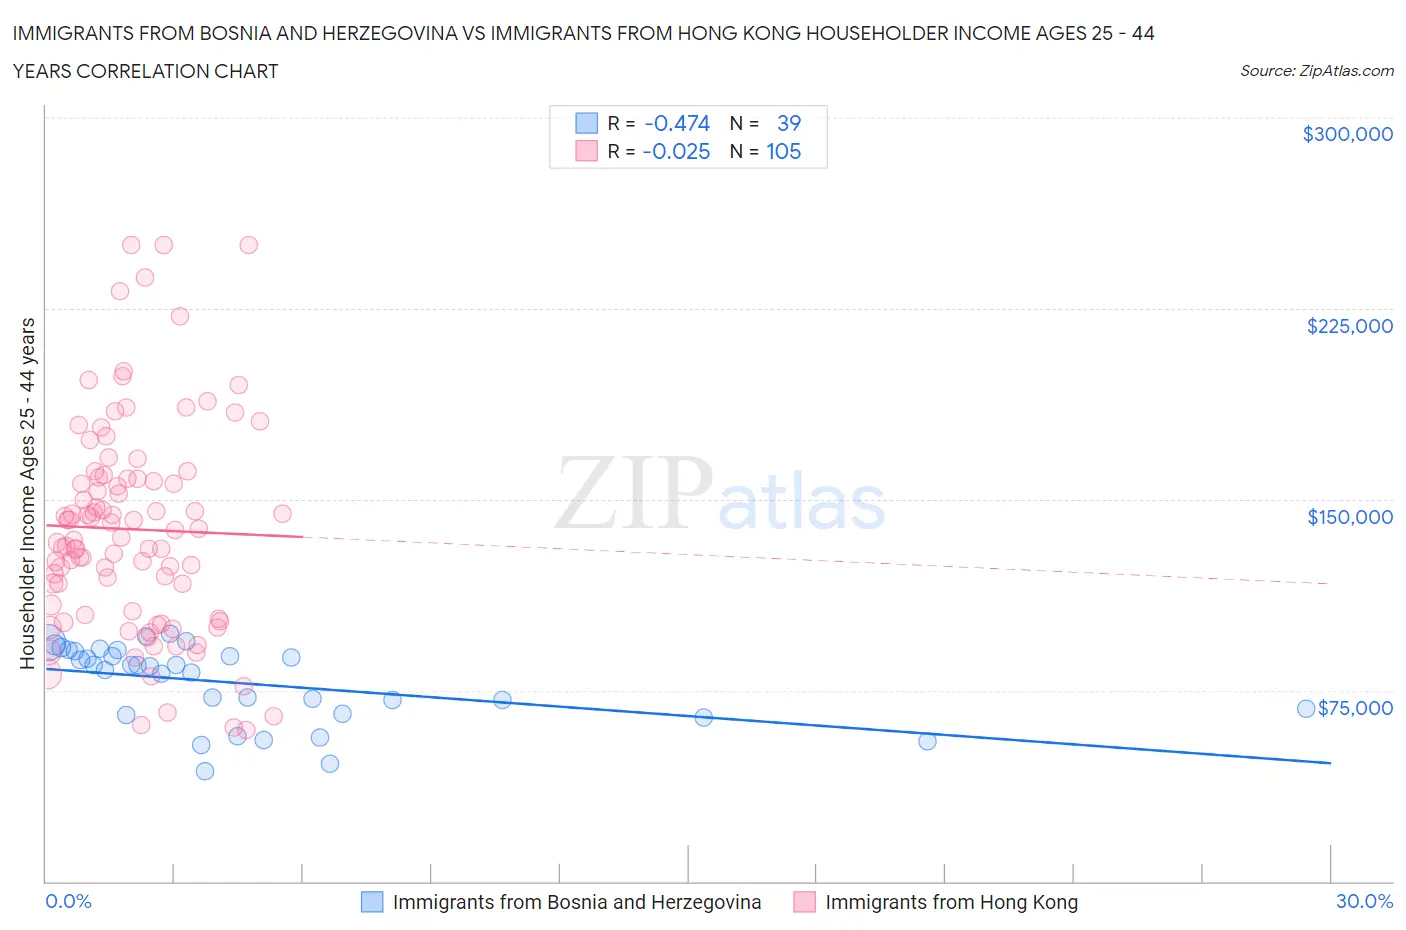 Immigrants from Bosnia and Herzegovina vs Immigrants from Hong Kong Householder Income Ages 25 - 44 years